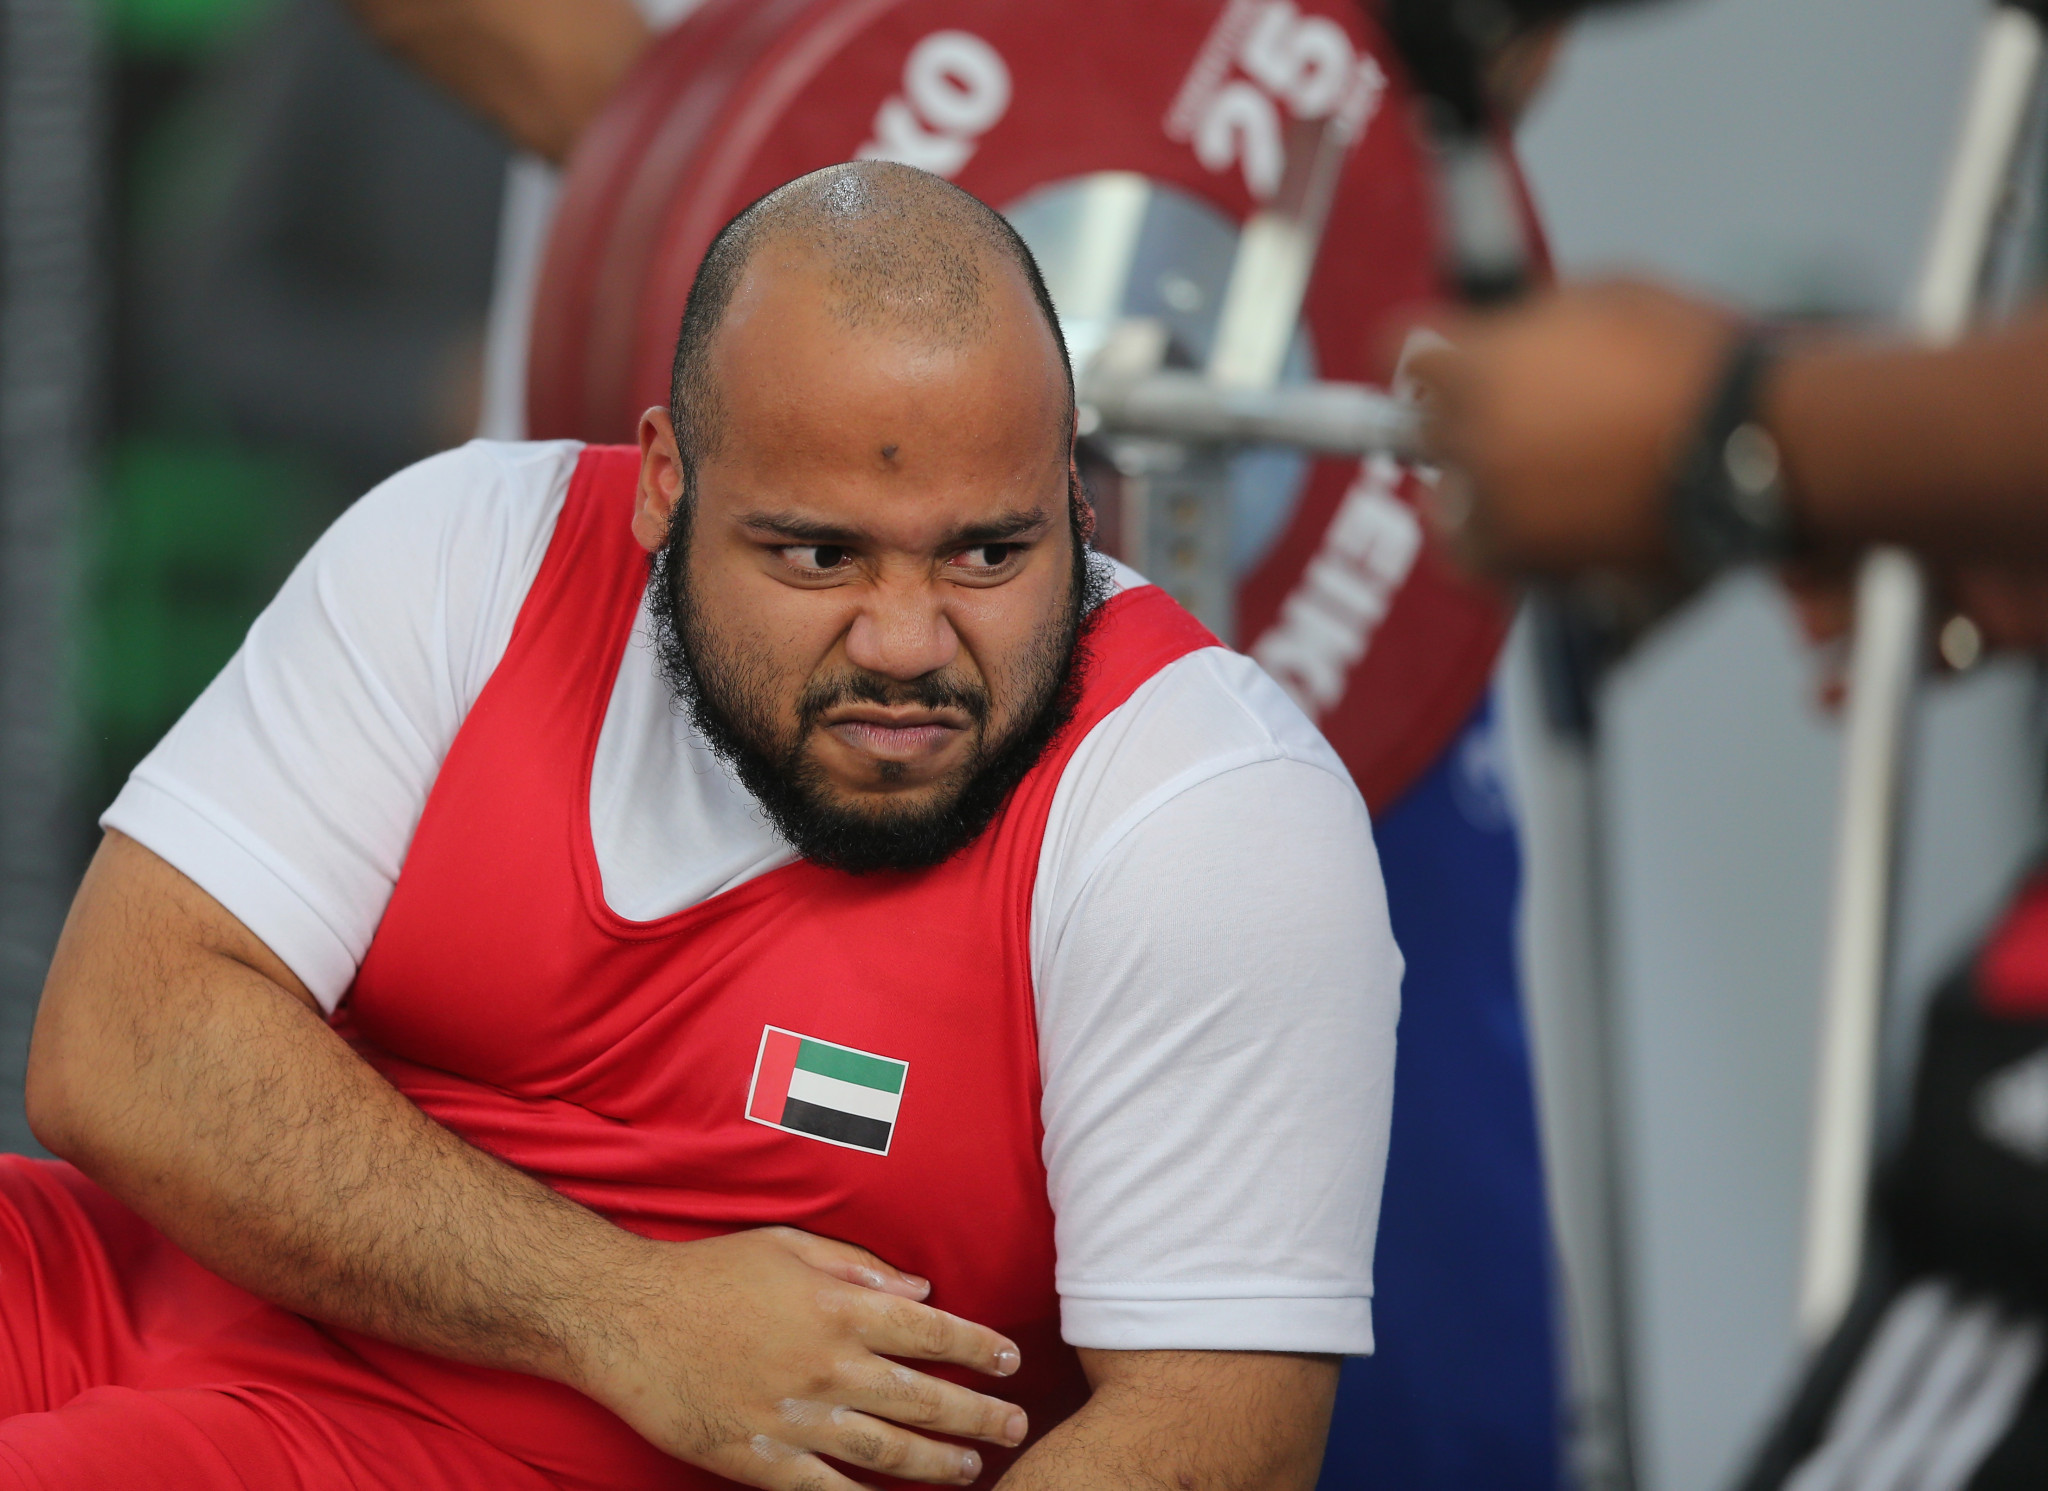 Hosts clinch double gold on penultimate day of World Para Powerlifting World Cup in Dubai